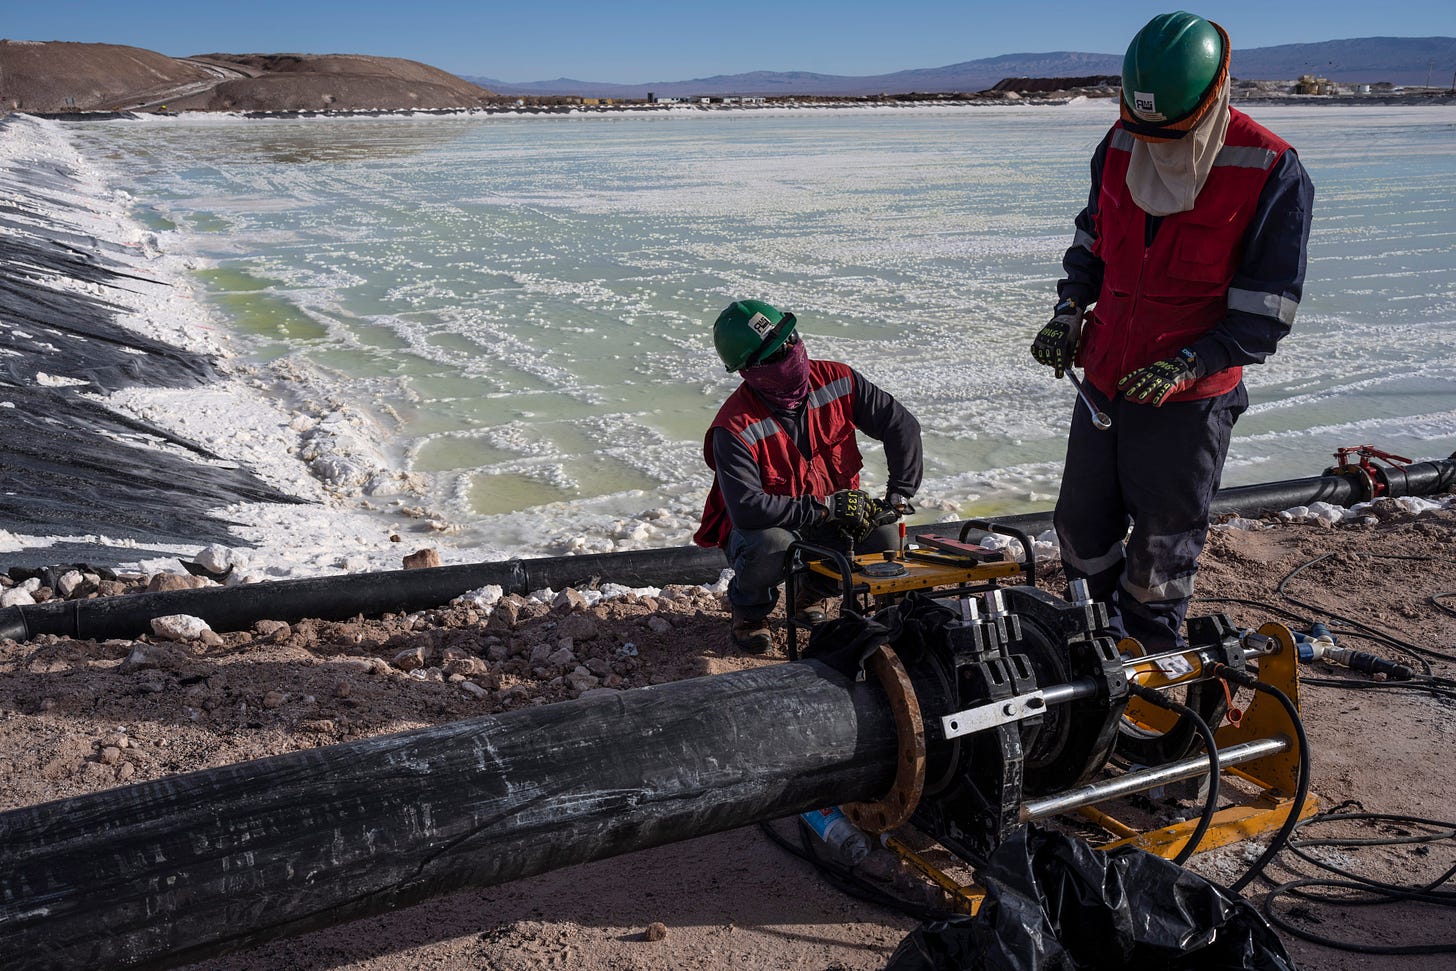 Workers perform maintenance at the pools where brine is evaporated at the lithium extraction plant facilities of the SQM Lithium company near Peine, Chile.